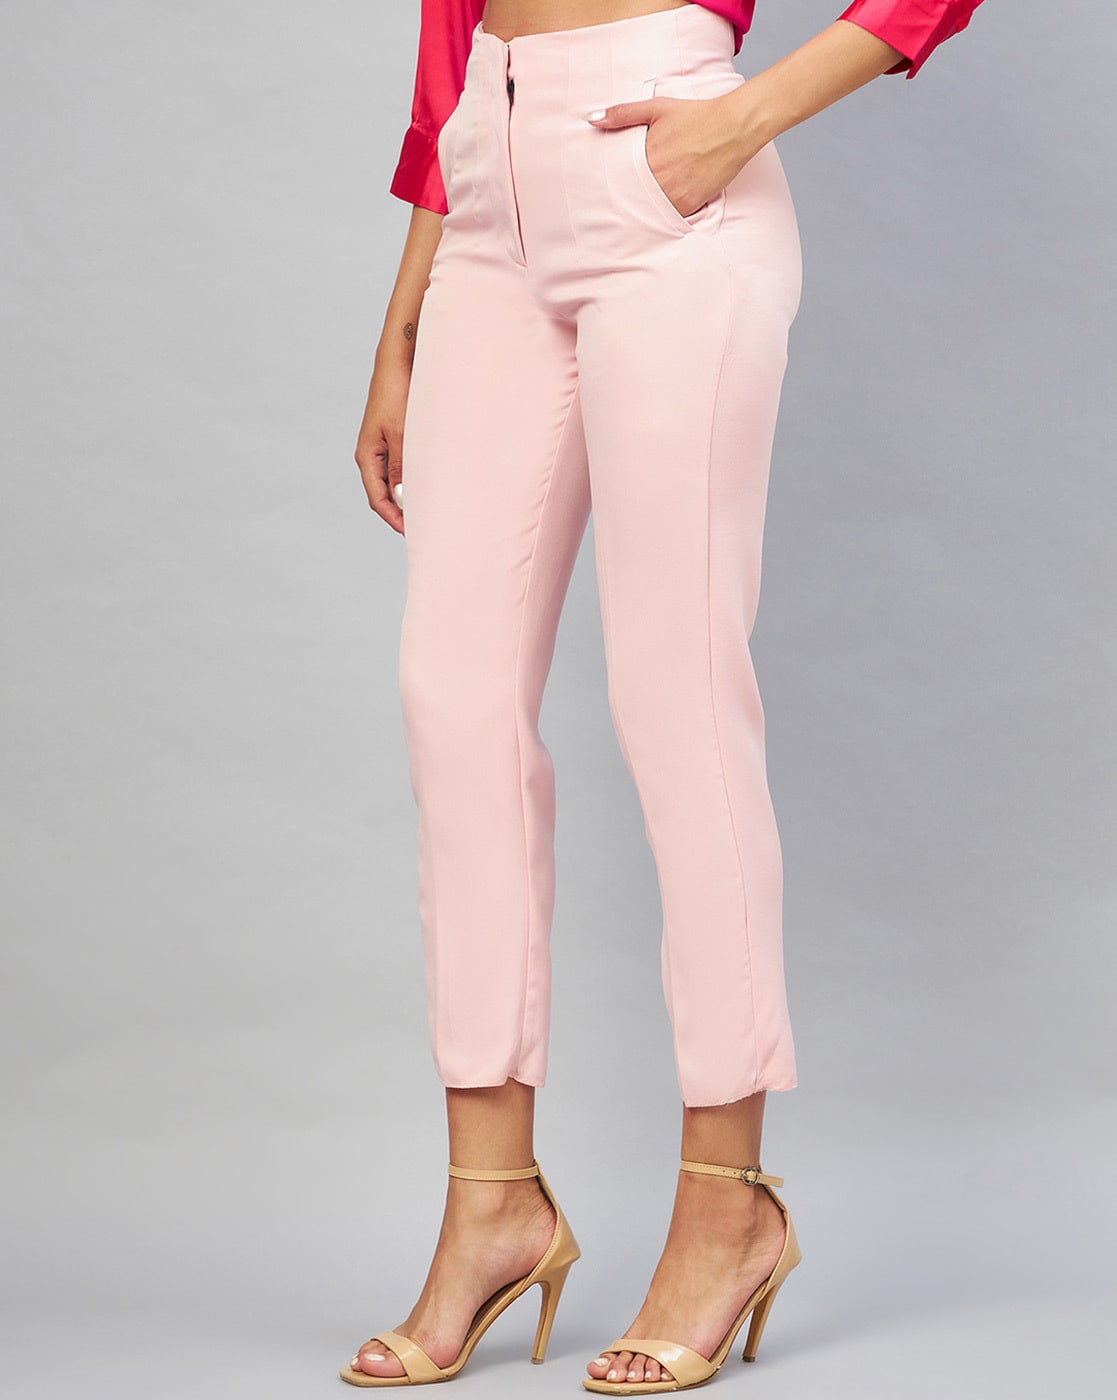 Buy Baby Pink White Ankle Women Check Pant Brocade Silk for Best Price,  Reviews, Free Shipping